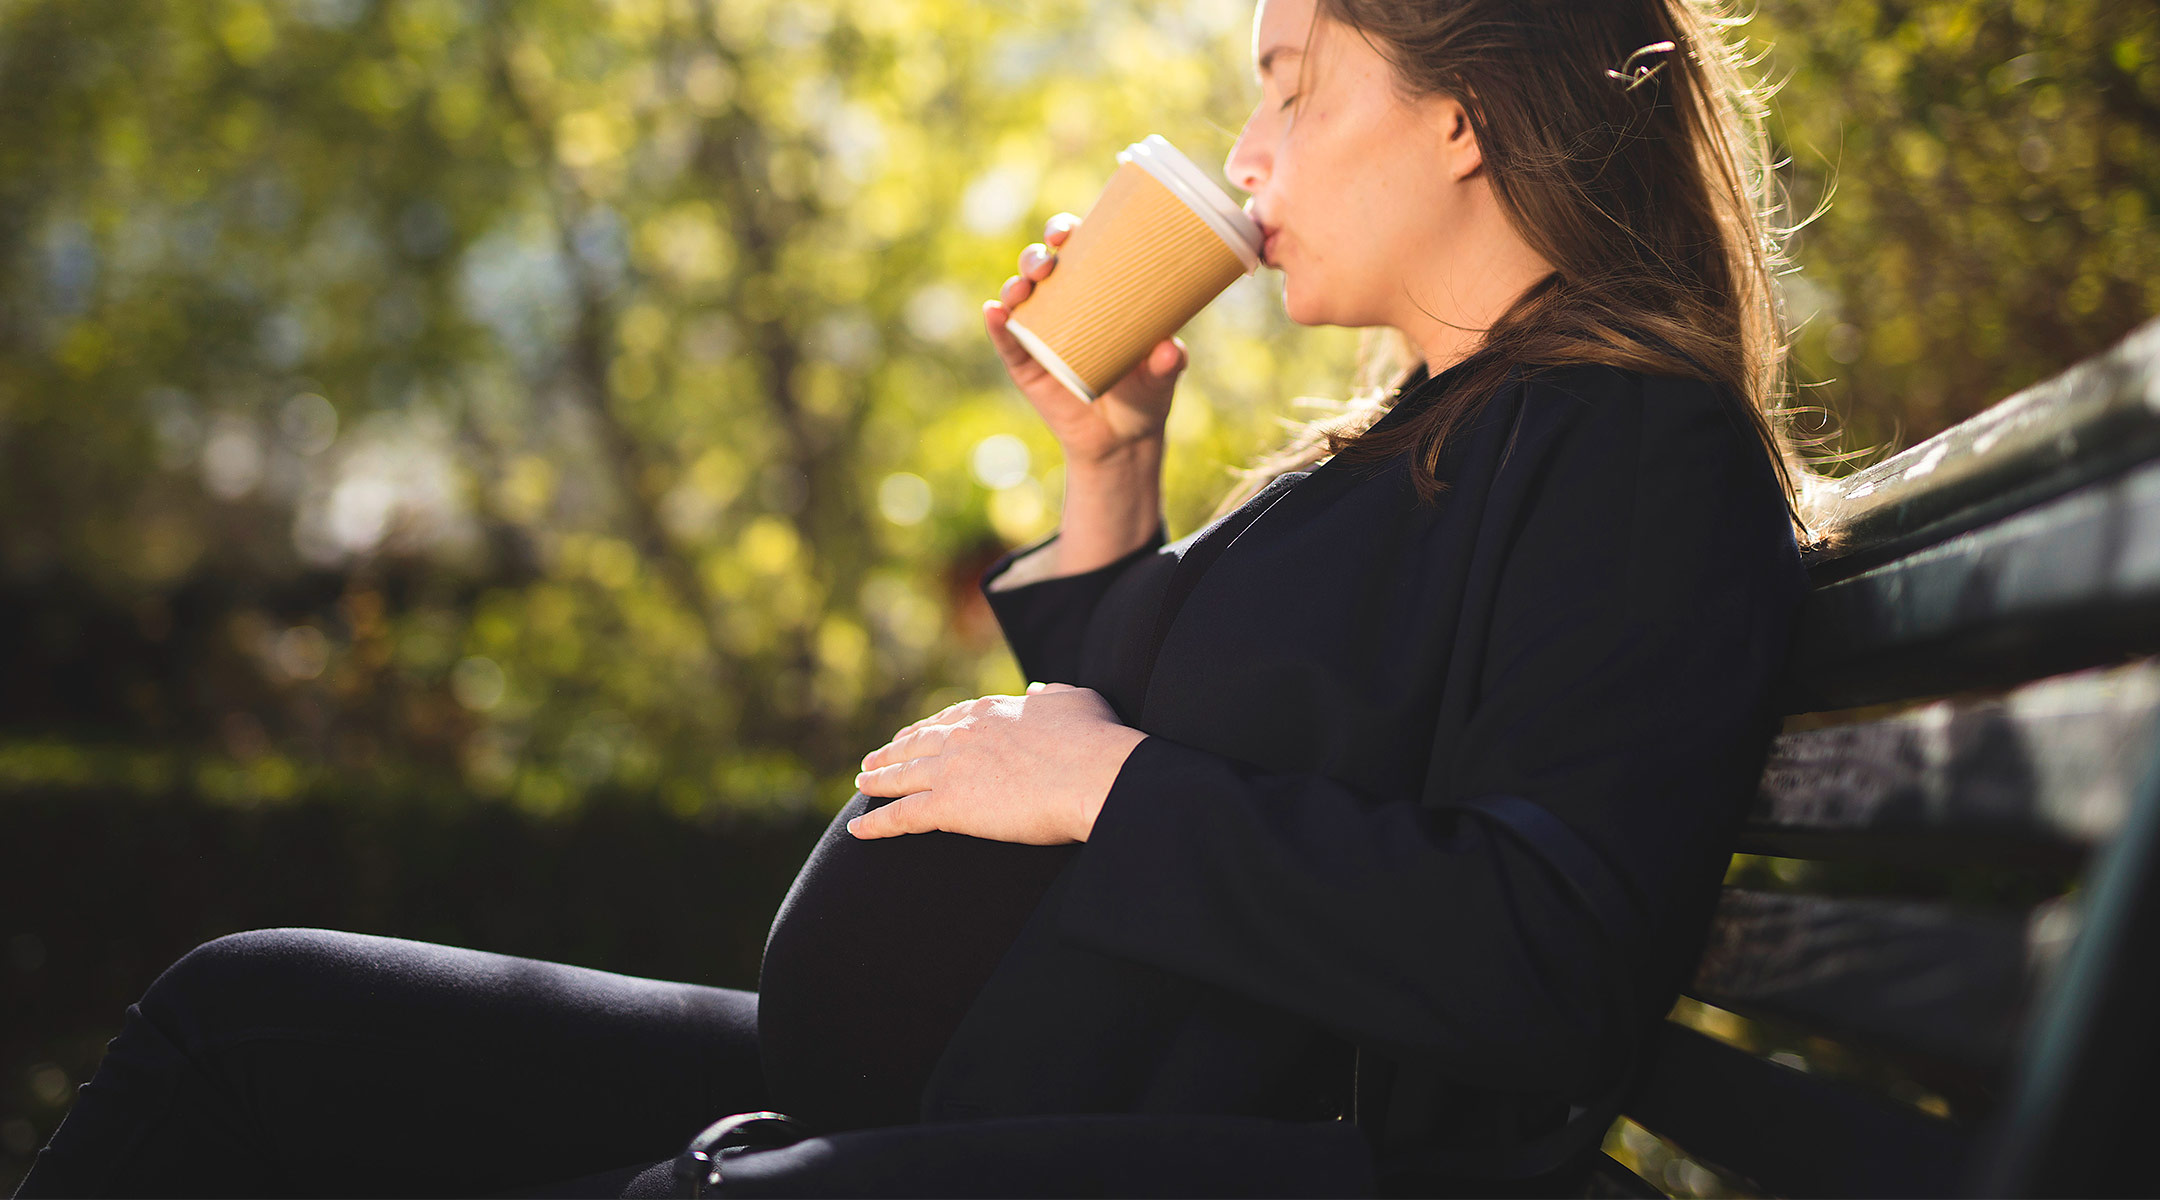 pregnant woman on a bench outside drinking coffee